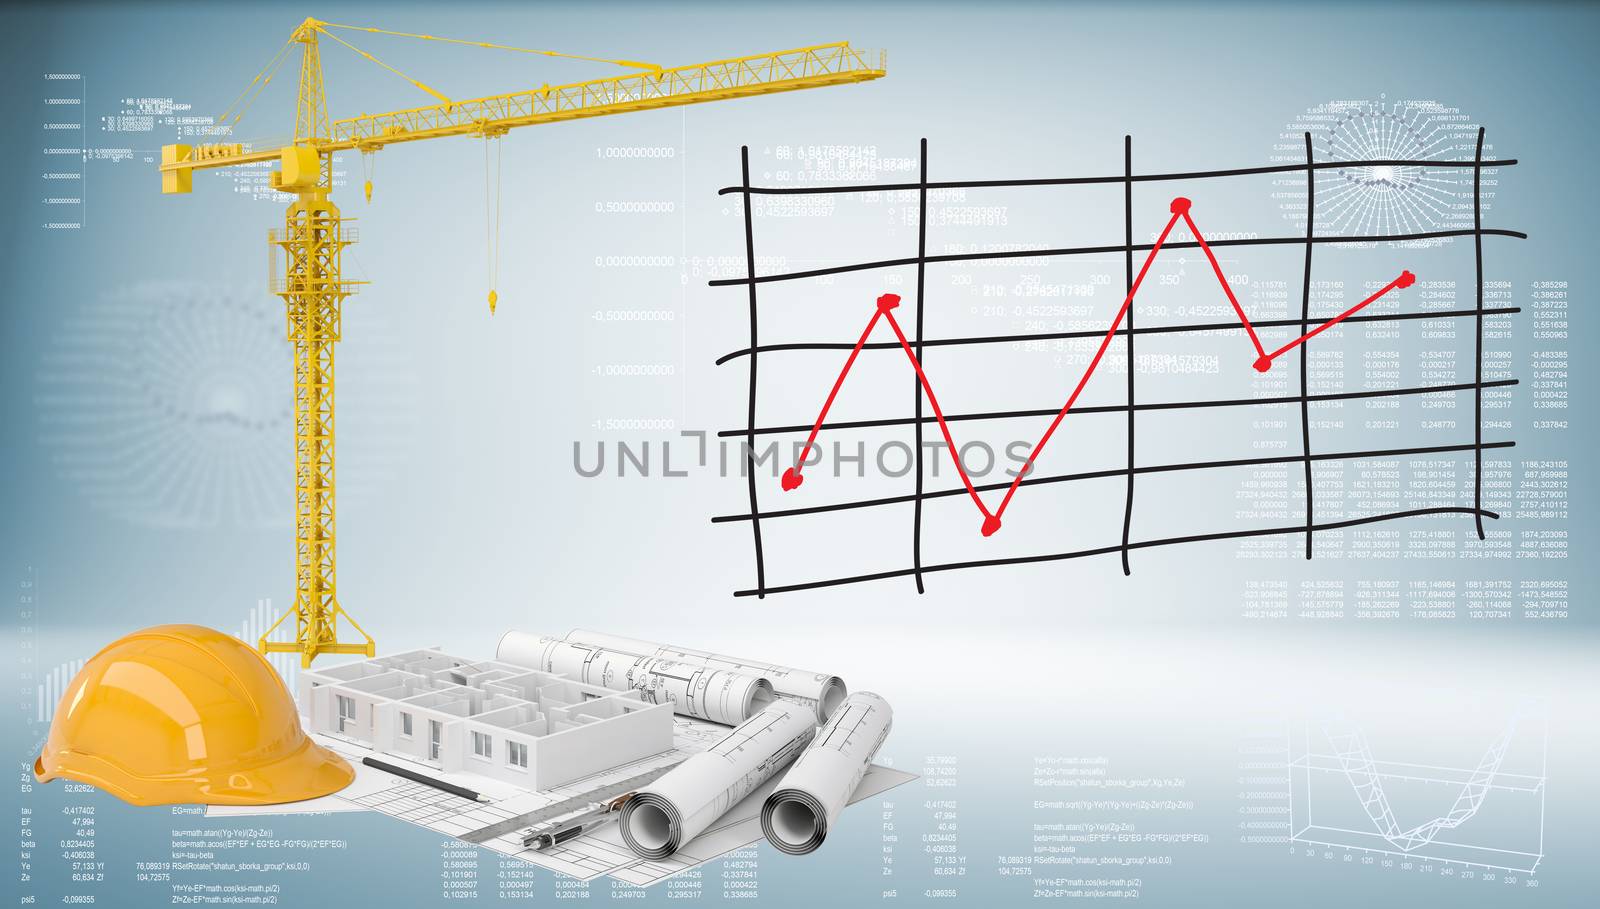 Drawings, tower crane, helmet, building walls and graph of price changes